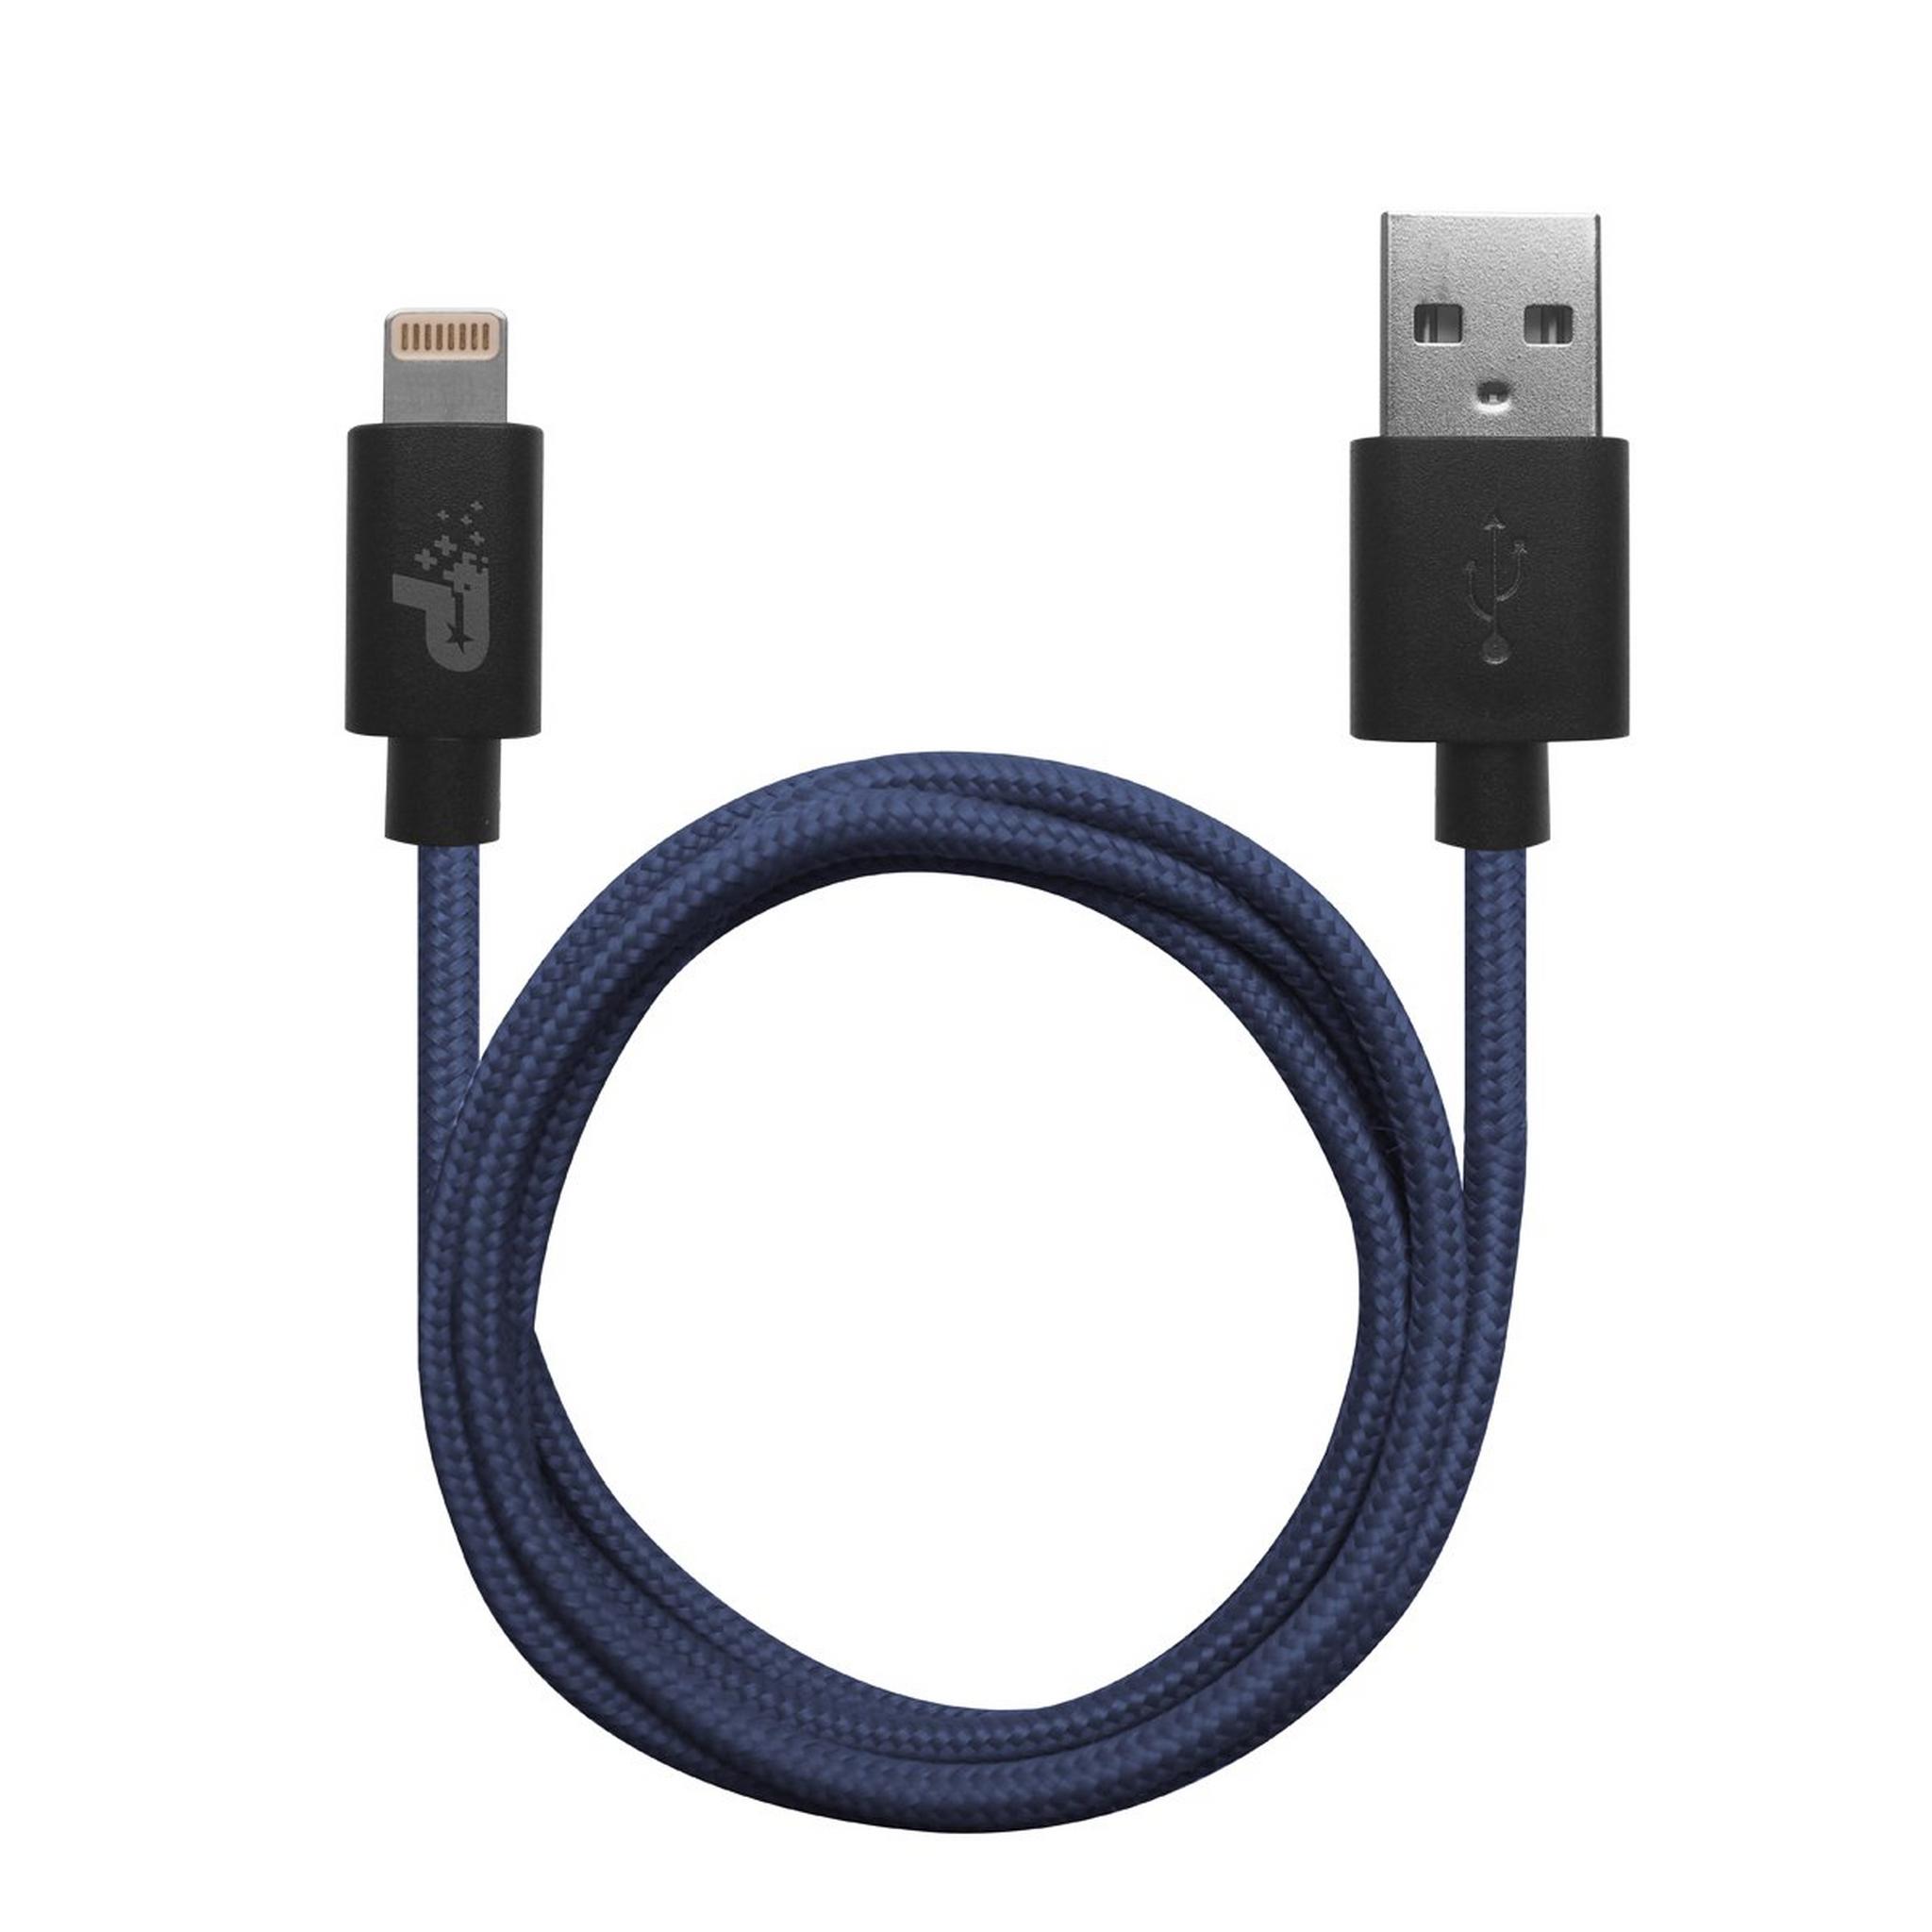 Patriot Woven USB to Lightning Cable 1 meter - Navy Blue